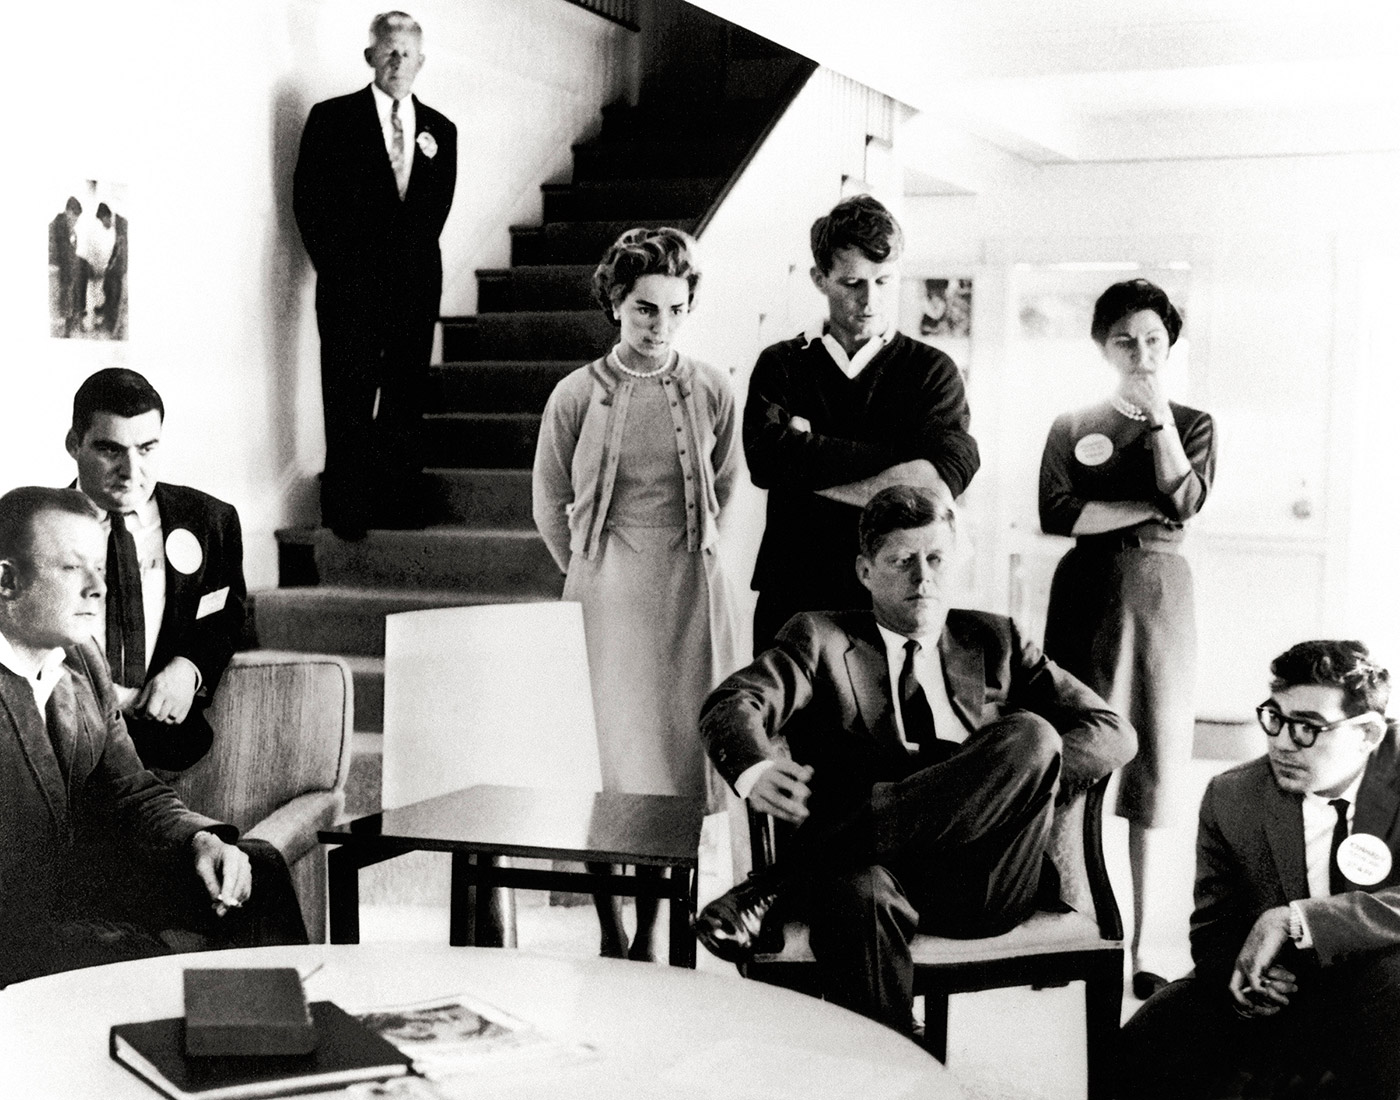 John F. Kennedy and family Waiting for election results, Hyannis Port, Massachusetts, November 9, 1960.